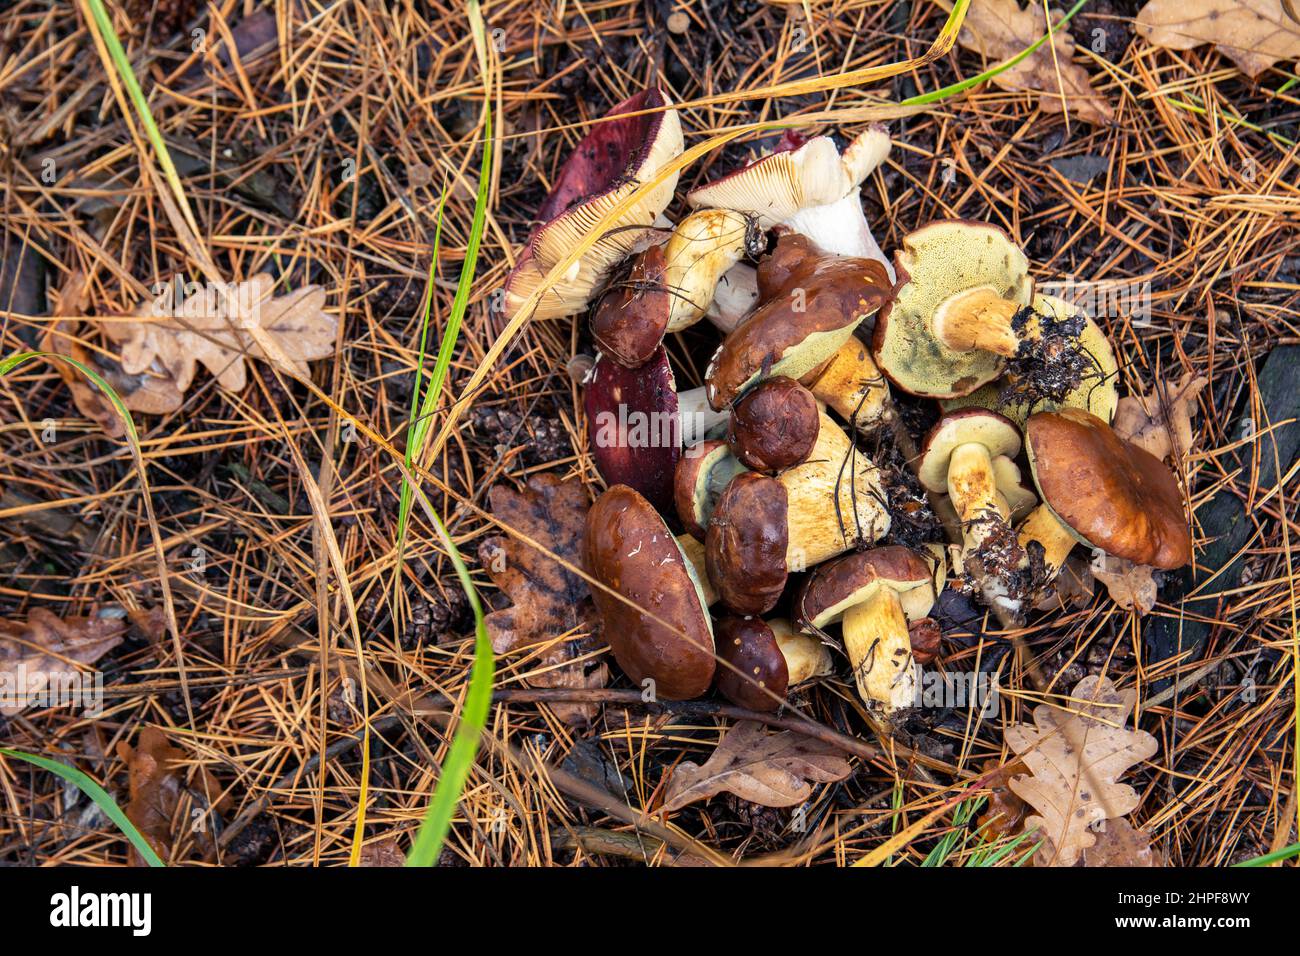 Mushrooms with brown caps in the autumn forest. Polish mushroom close-up. Stock Photo